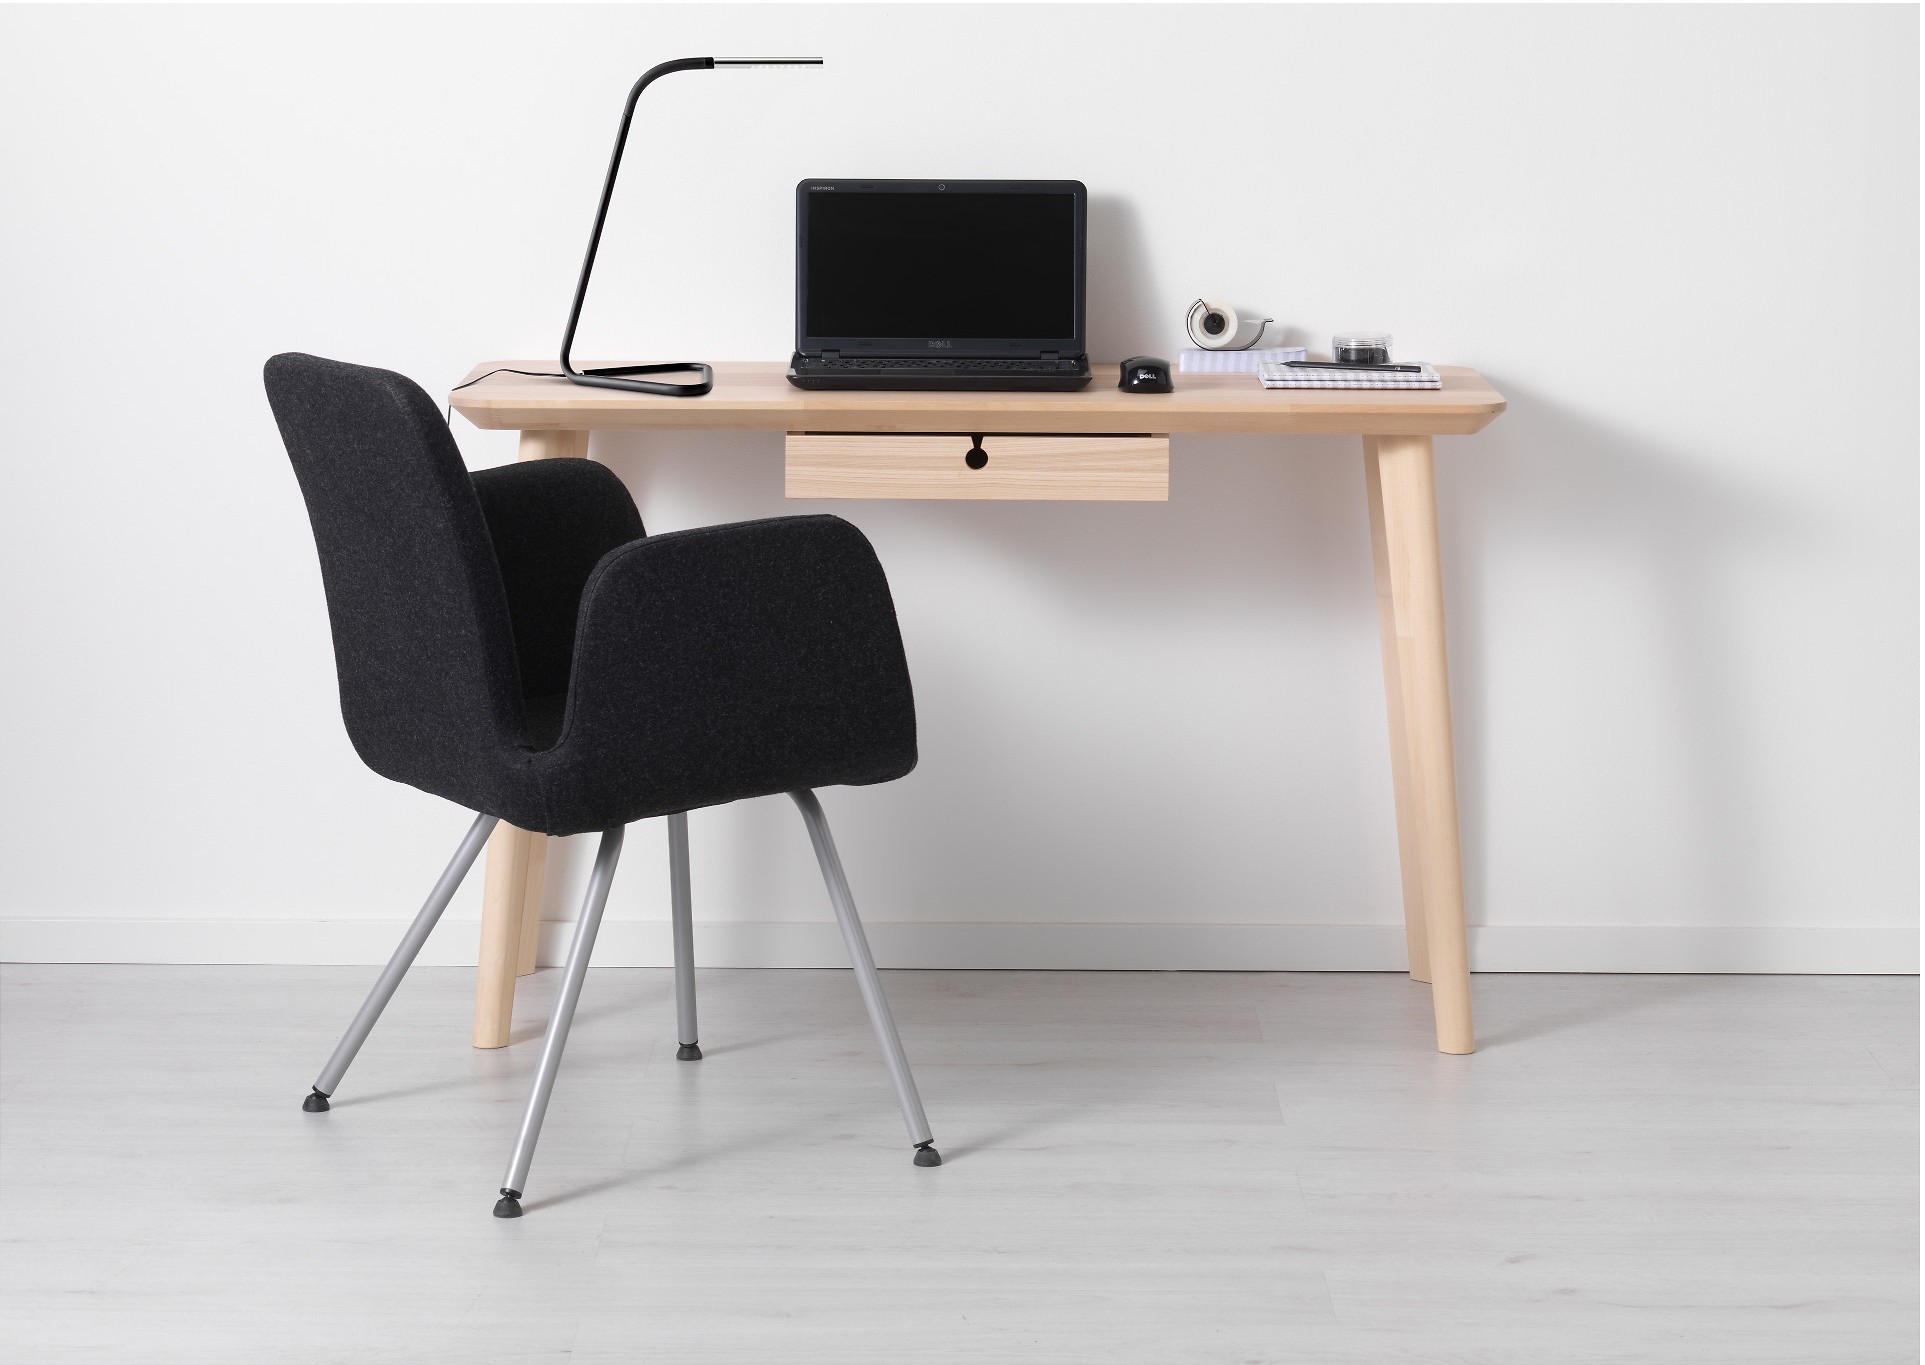 To share a tiny apartment with a boyfriend or girlfriend, downsize to a smaller desk like LISABO from IKEA.